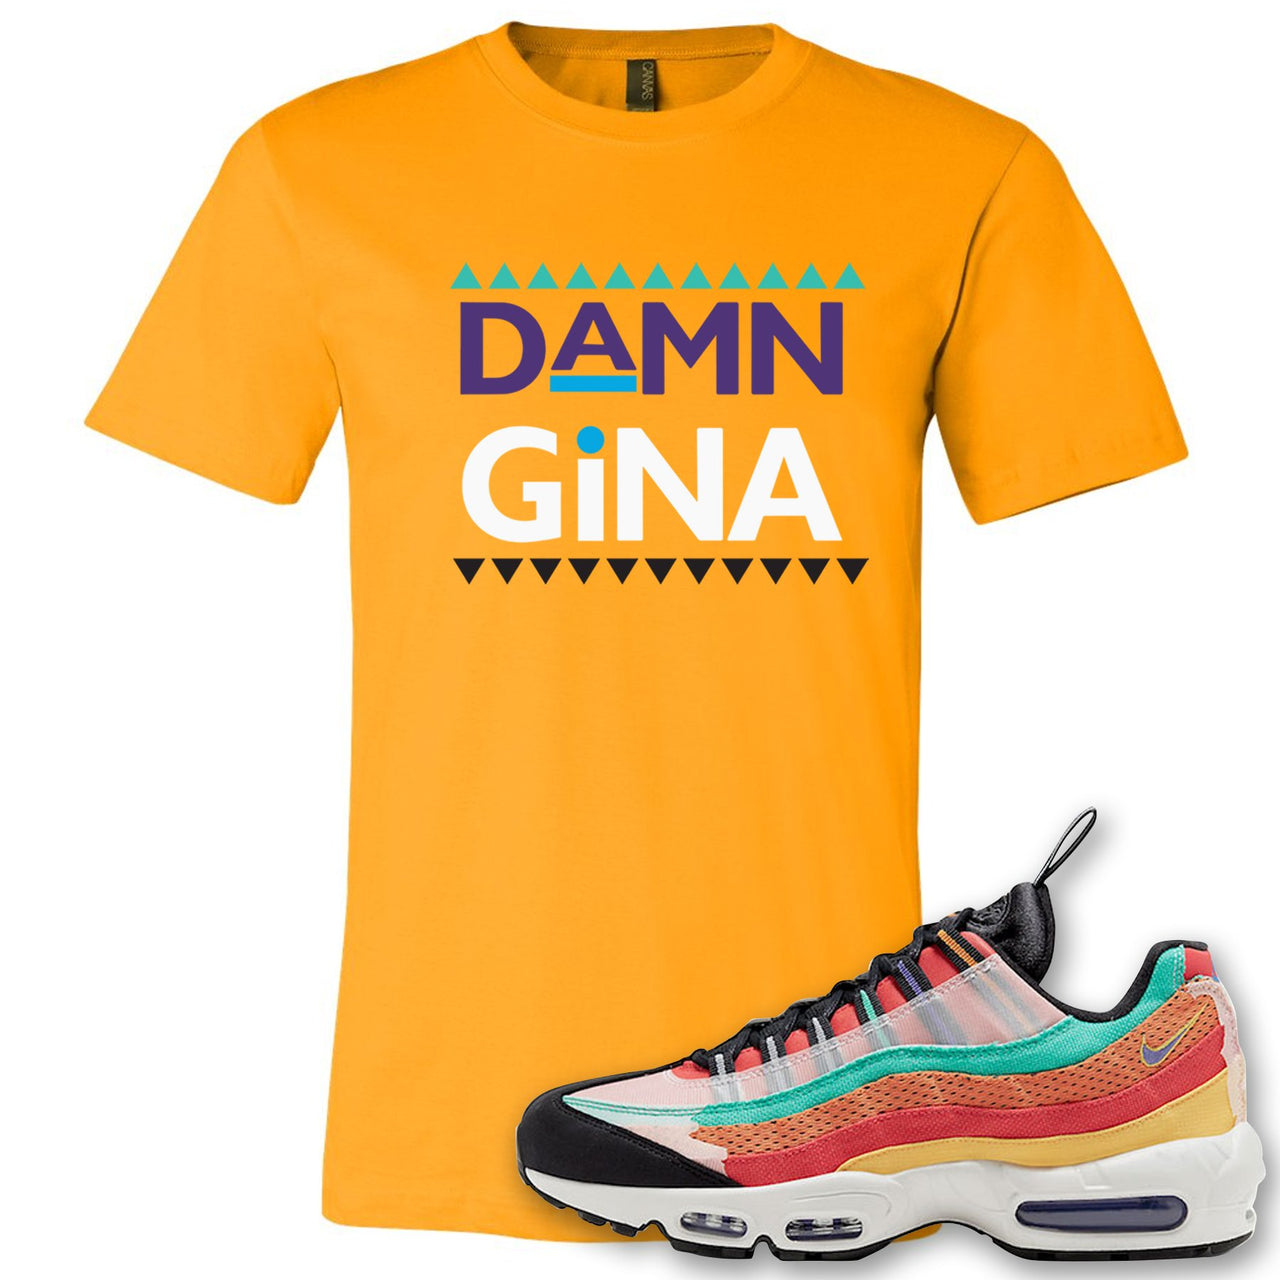 Air Max 95 Black History Month Sneaker Gold T Shirt | Tees to match Nike Air Max 95 Black History Month Shoes | Damn Gina